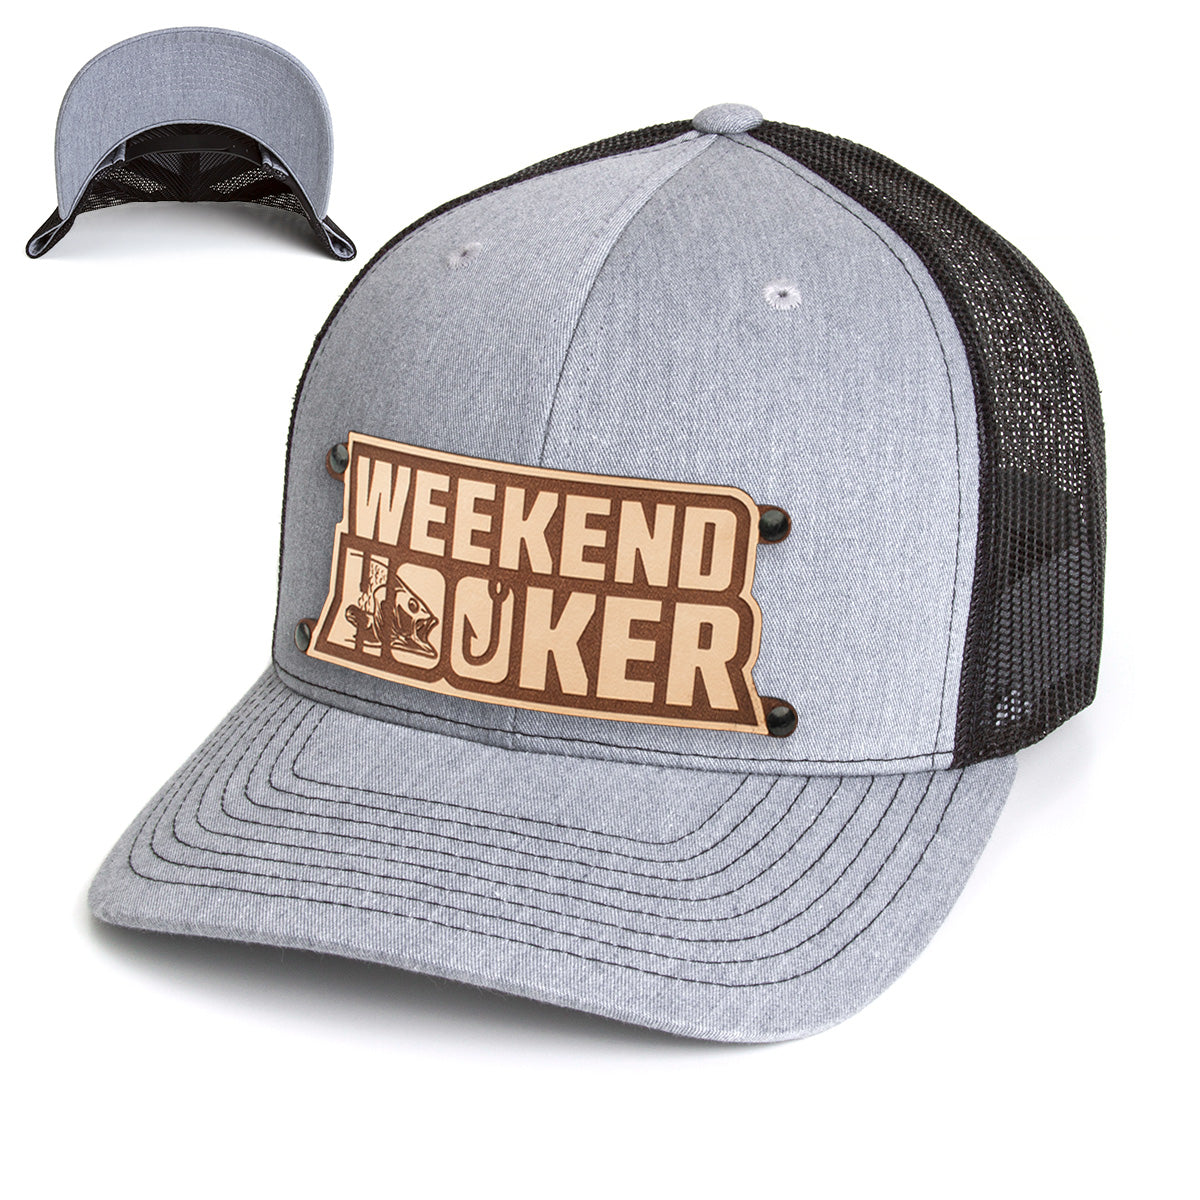 Weekend Hooker Fishing Hat - Breathable and Stylish Trucker Hat